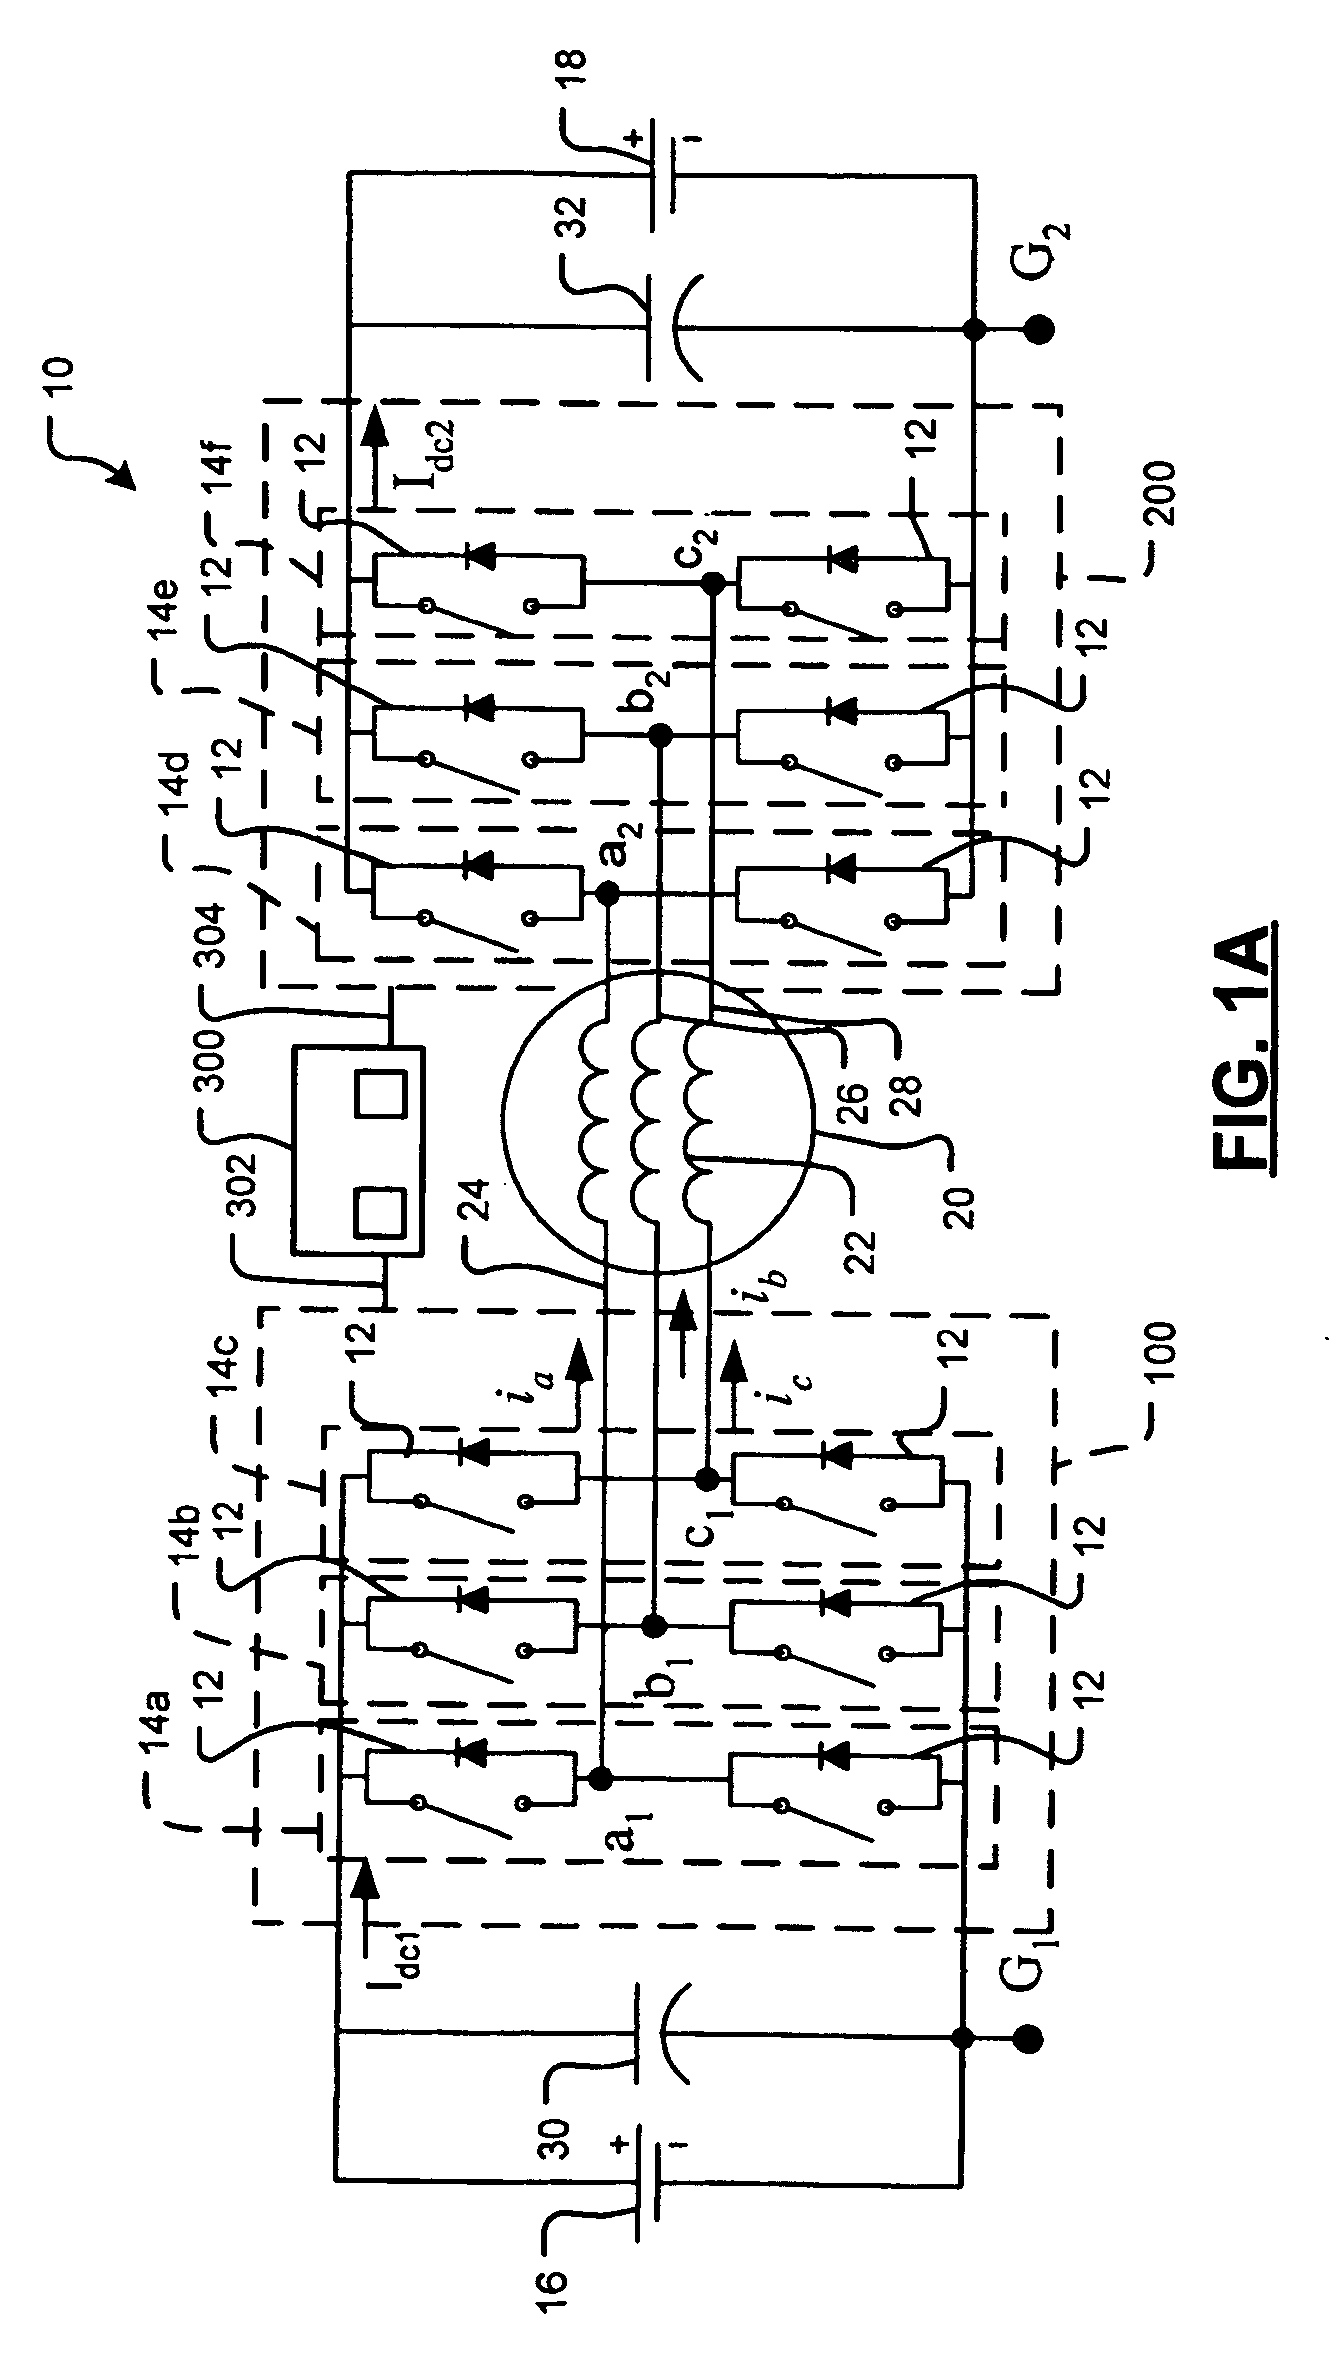 Double-ended inverter drive system topology for a hybrid vehicle